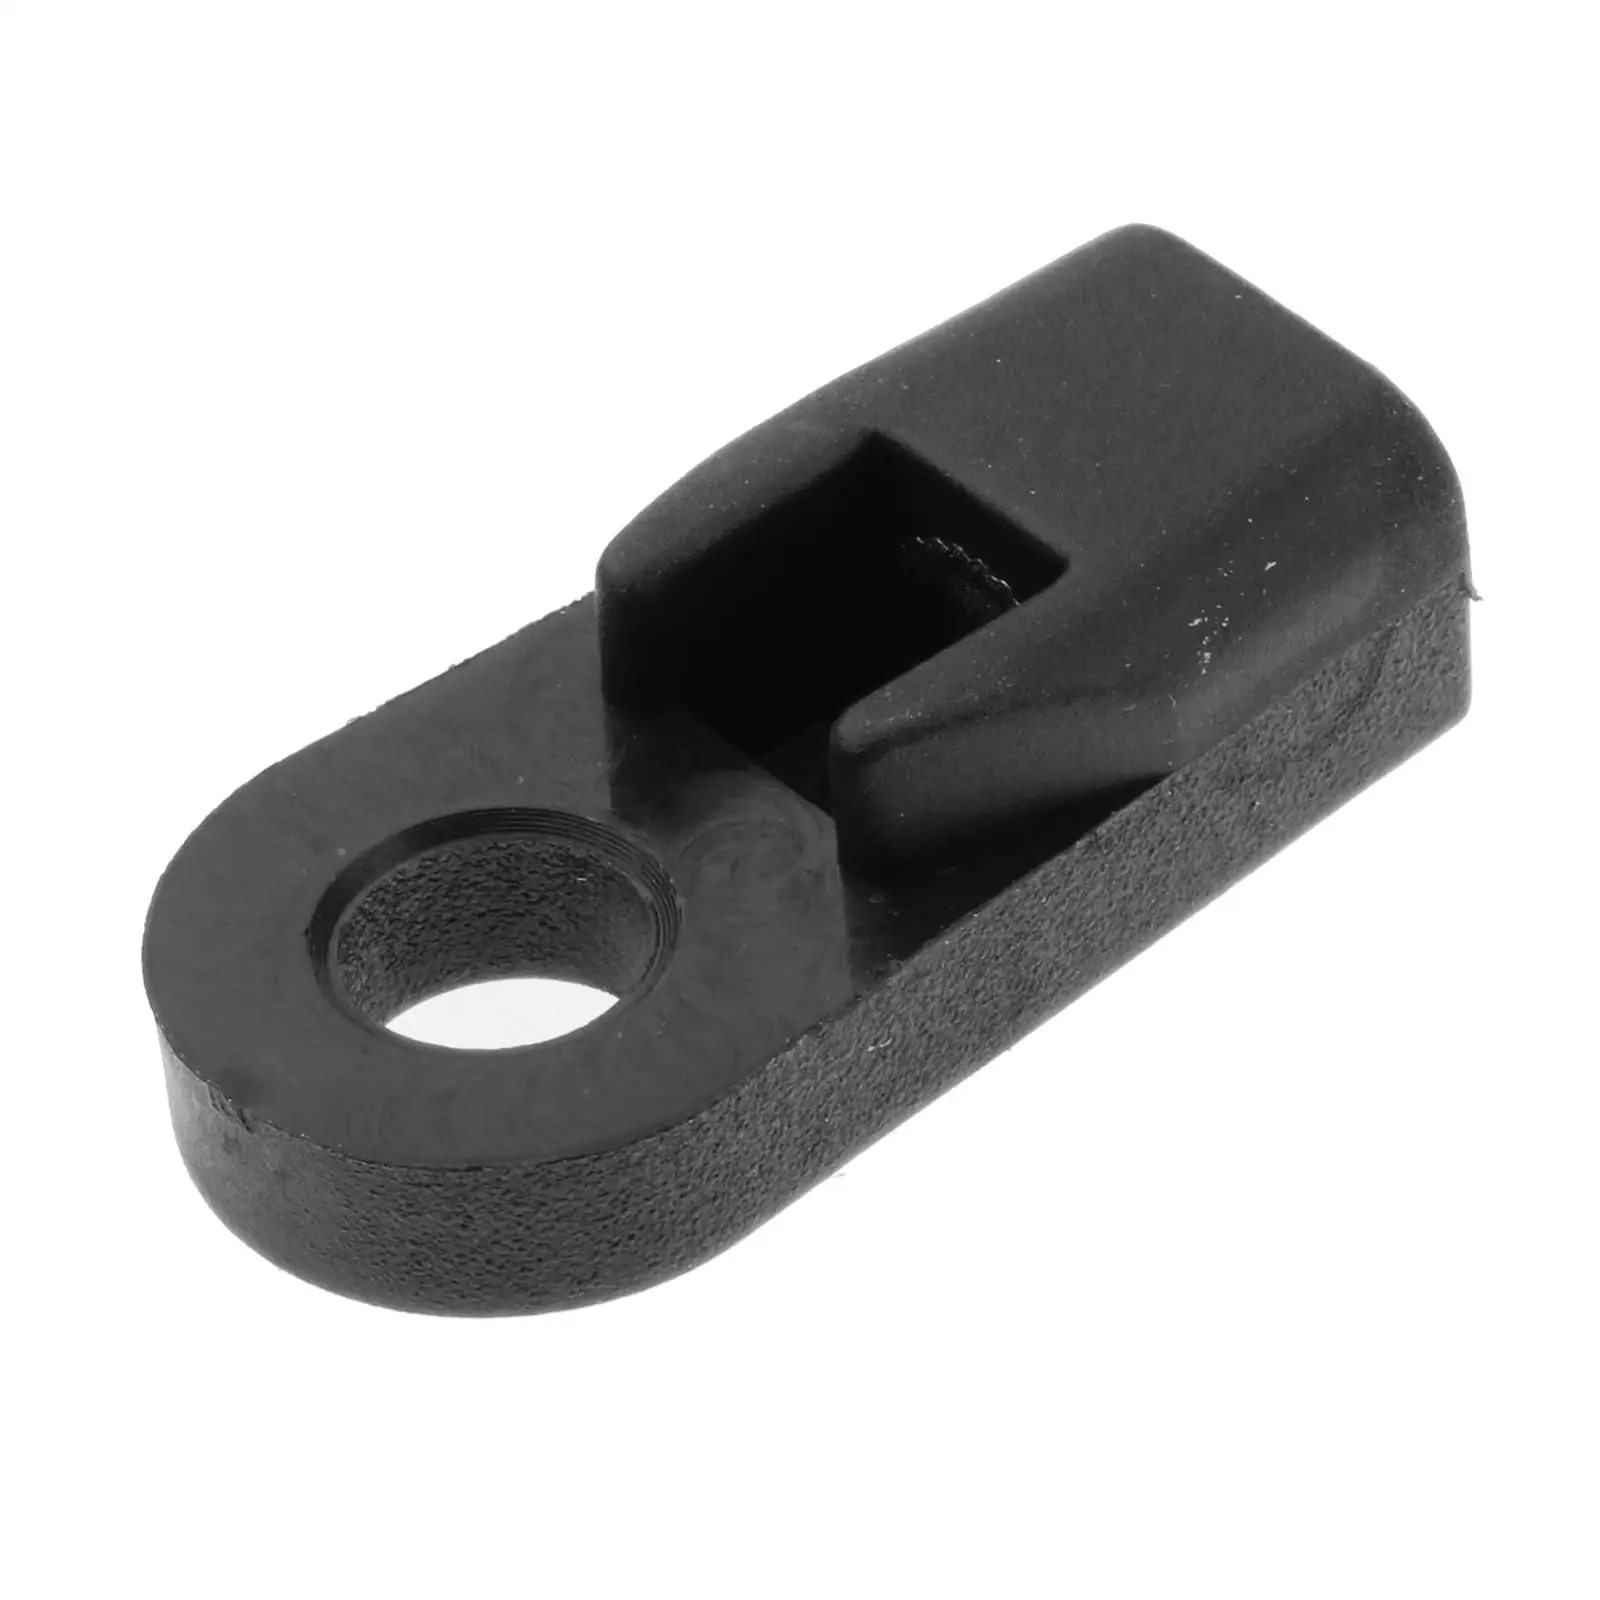 Cable End Connector for Suzuki Outboard Motor Spare Parts Replace Part Accessories